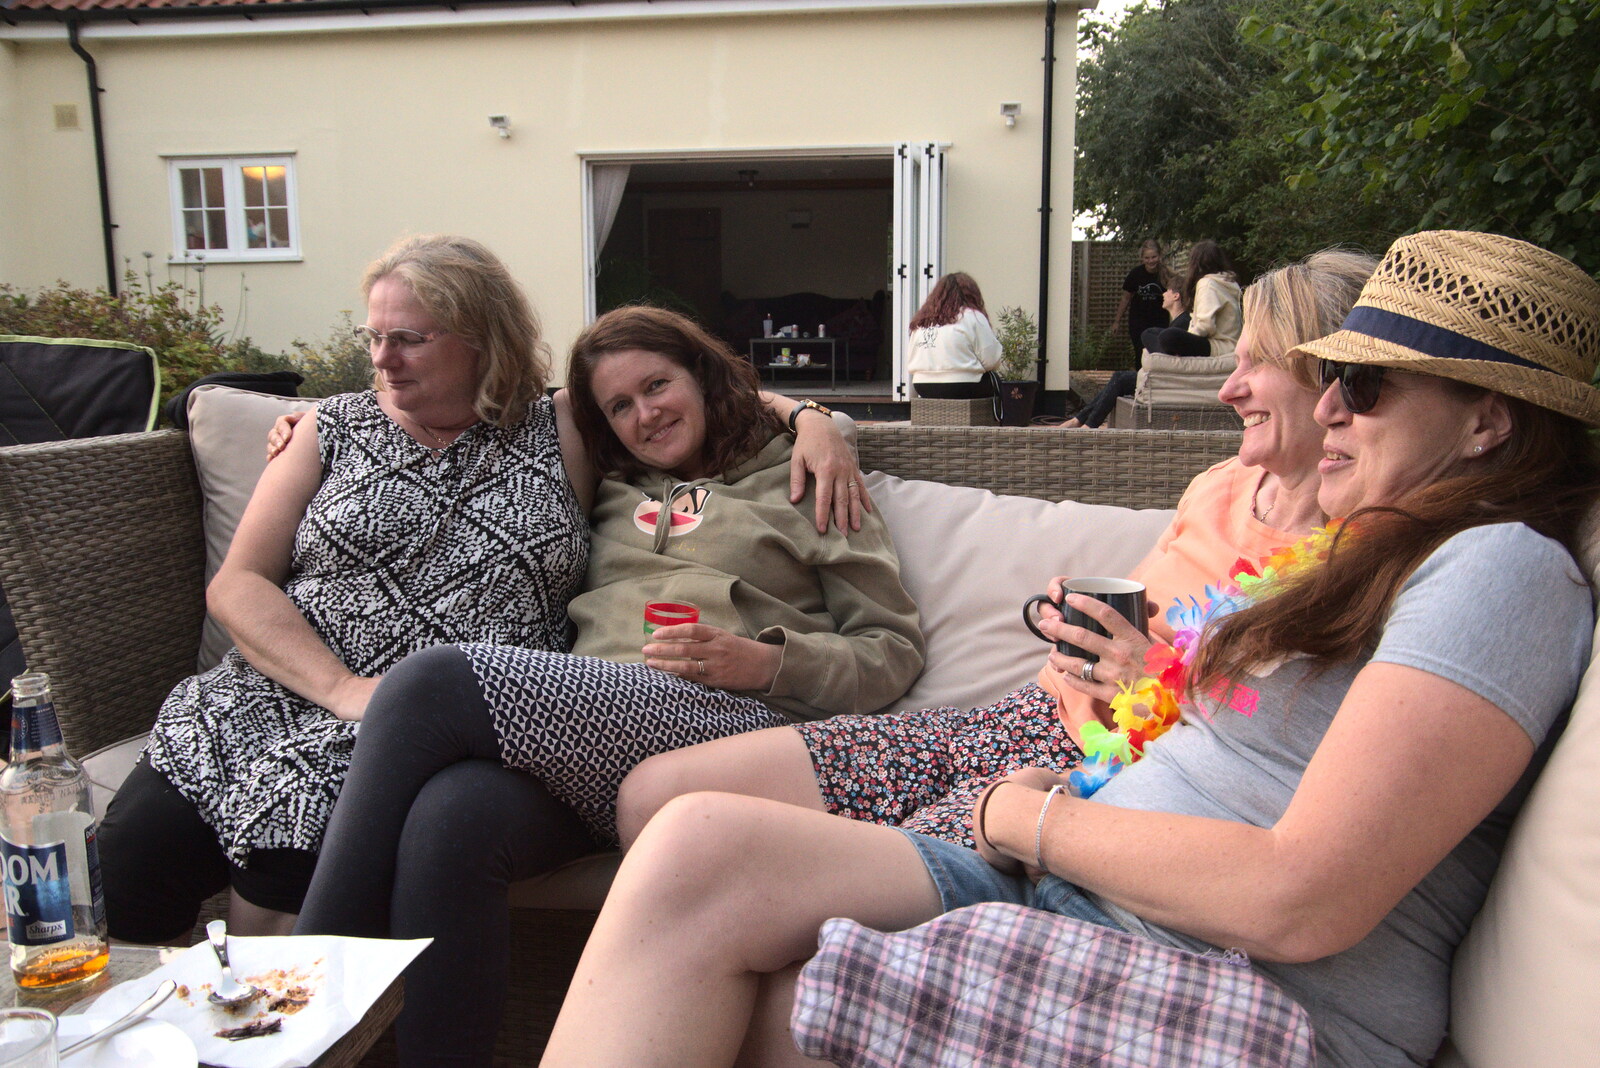 Isobel and Megan get a cuddle from Meg-fest, and Sean Visits, Bressingham and Brome, Suffolk - 1st August 2021